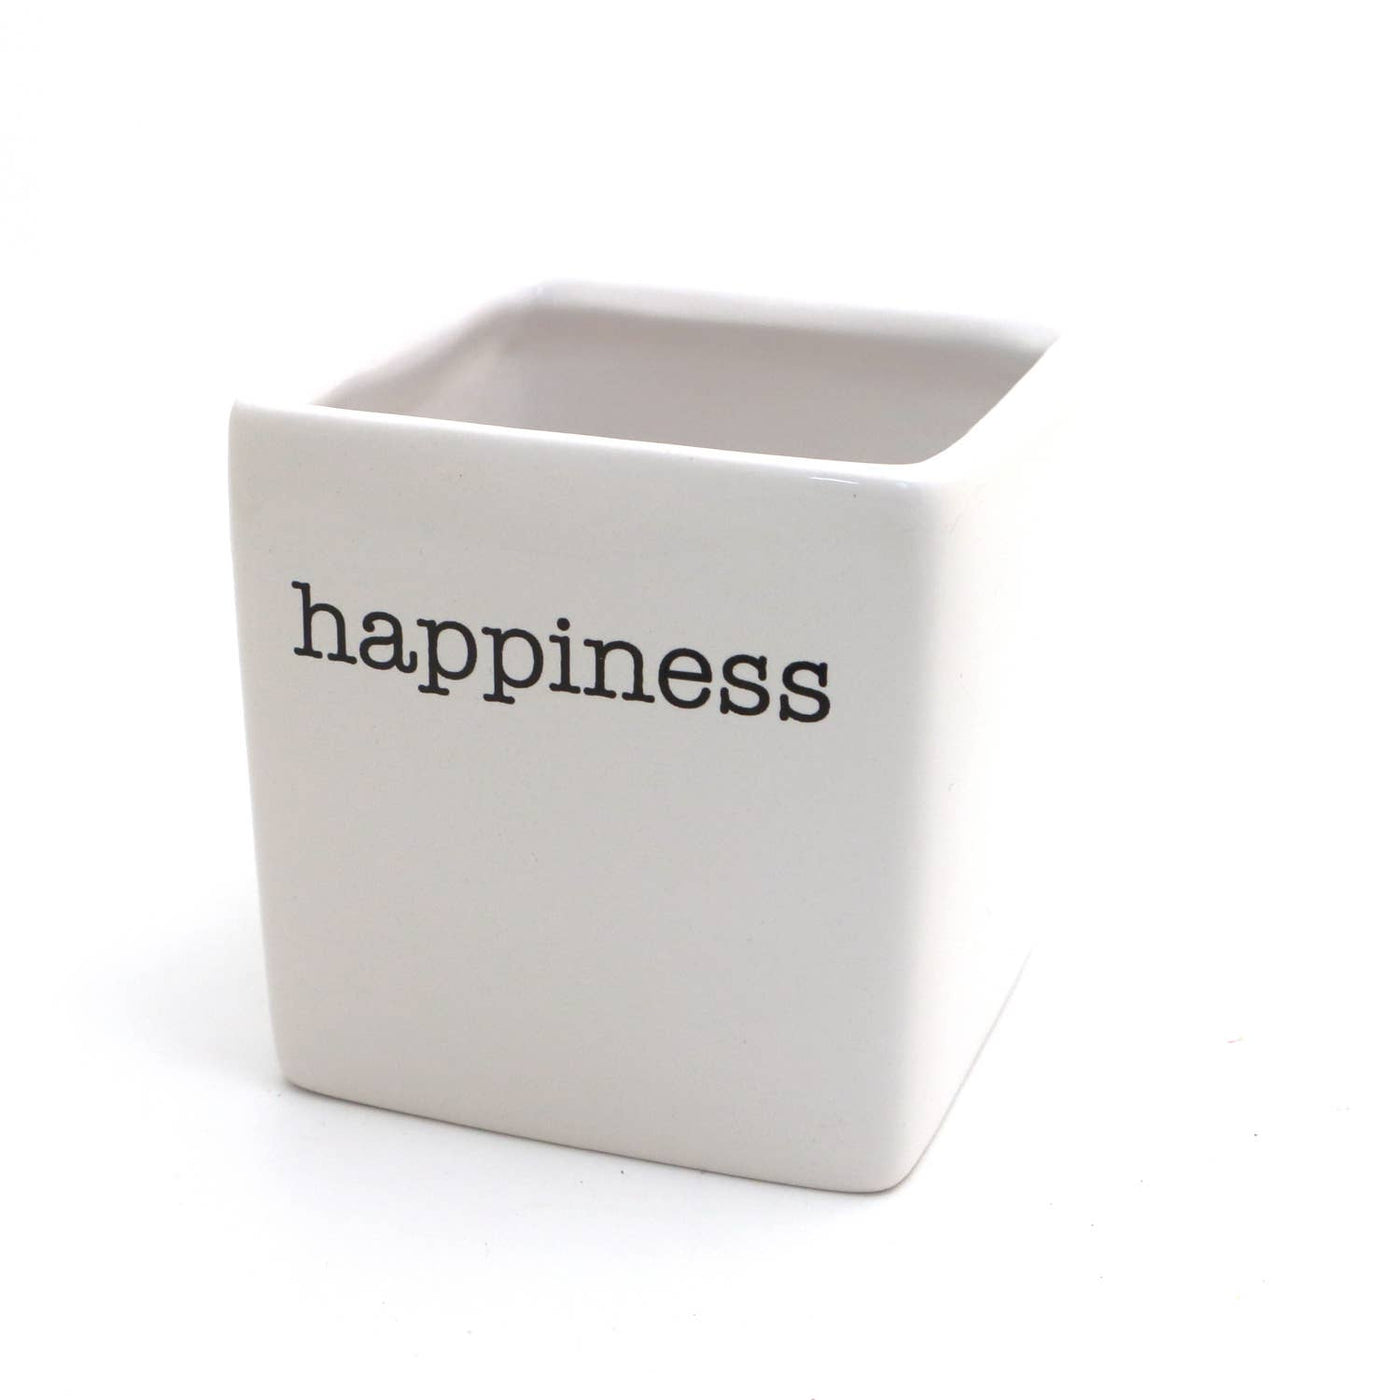 Happiness Planter/Pen Container